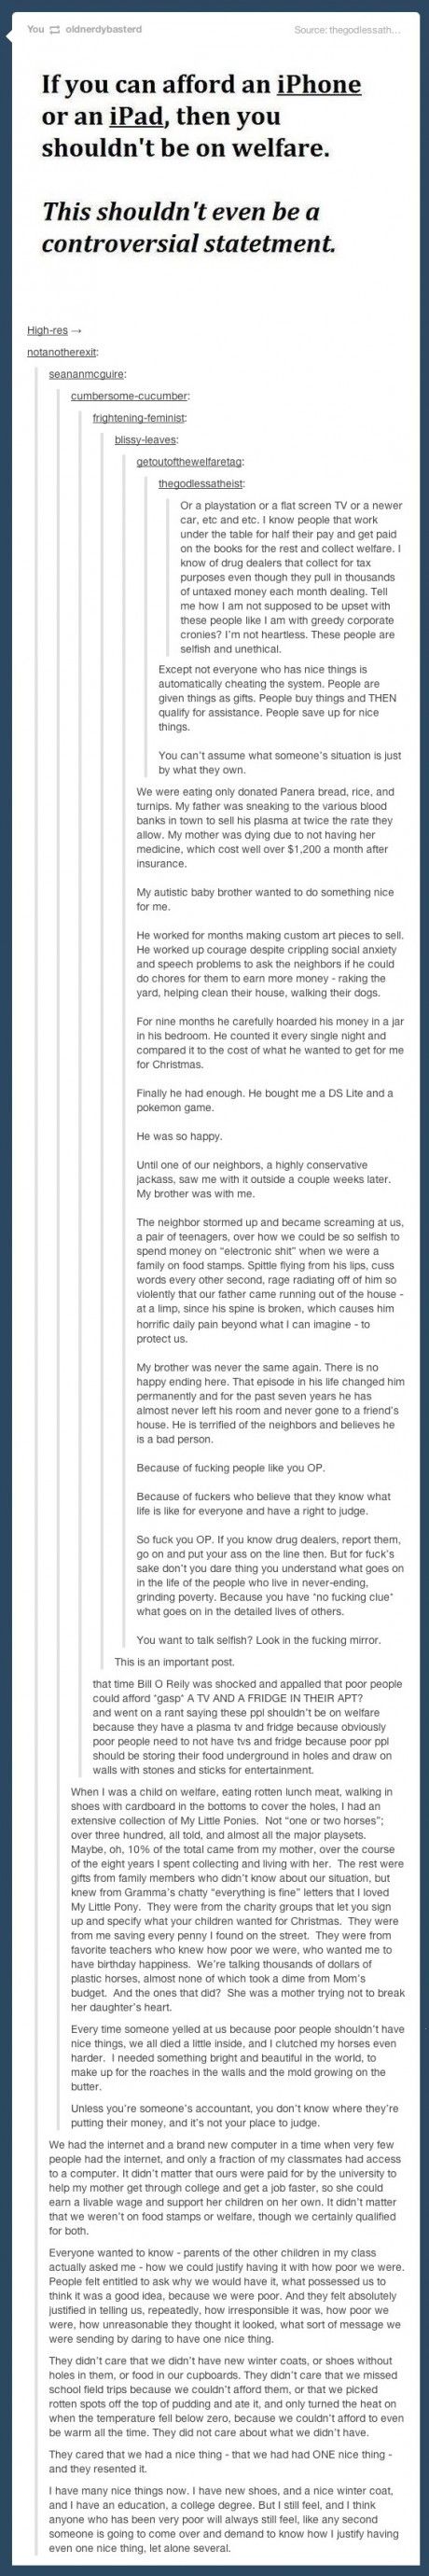 Why would we not want someone on welfare to have an iPhone? Let Tumblr break it